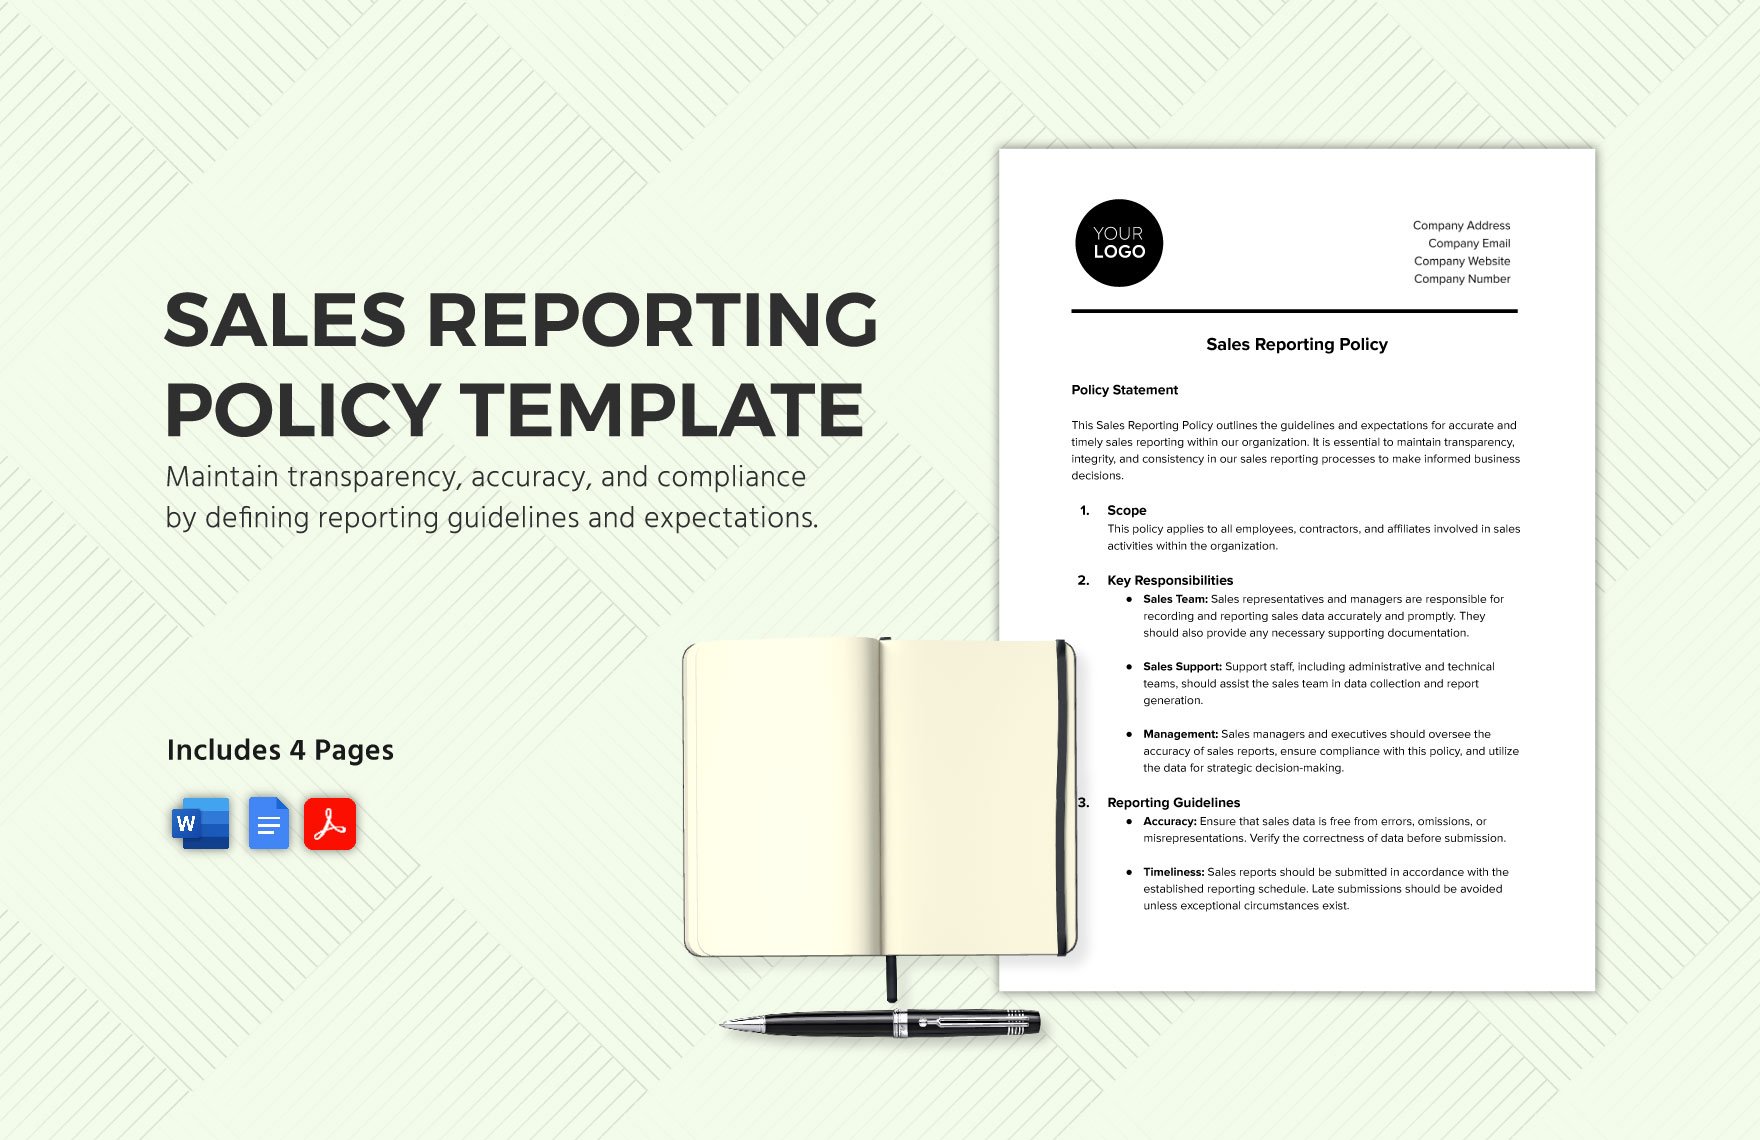 Sales Reporting Policy Template in Word, Google Docs, PDF